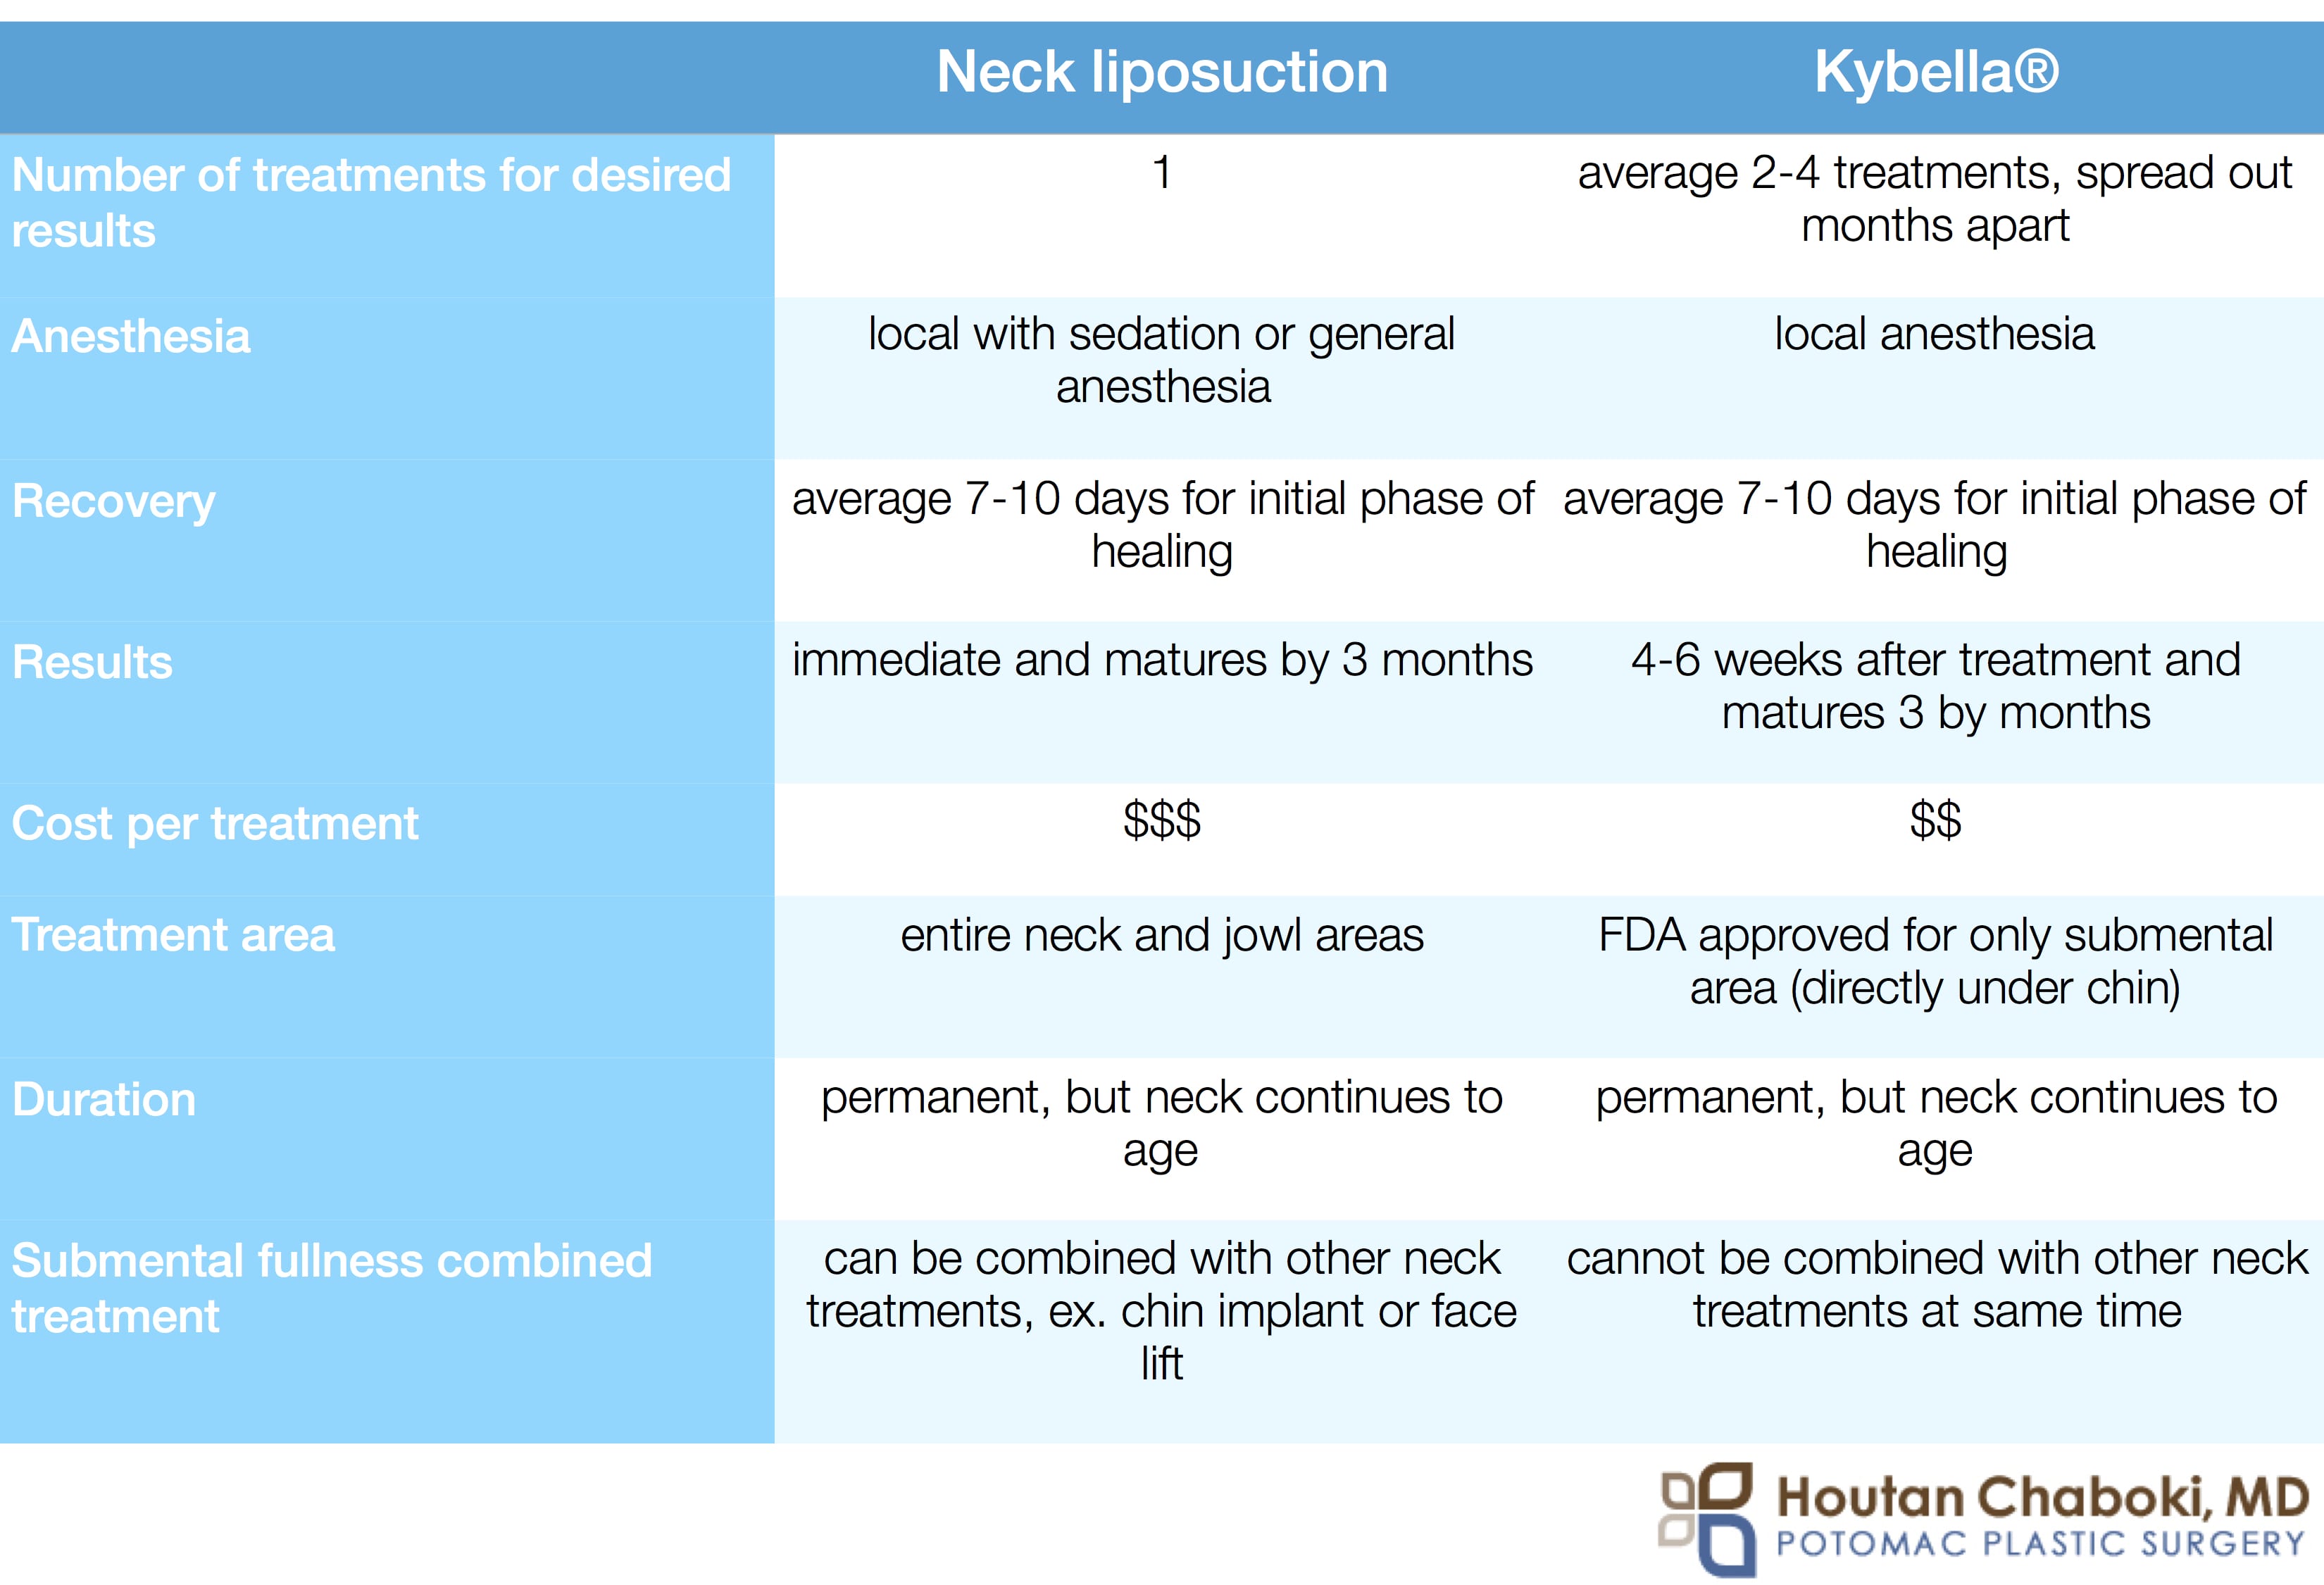 Neck liposuction vs. Kybella® for treatment of submental fullness from fat